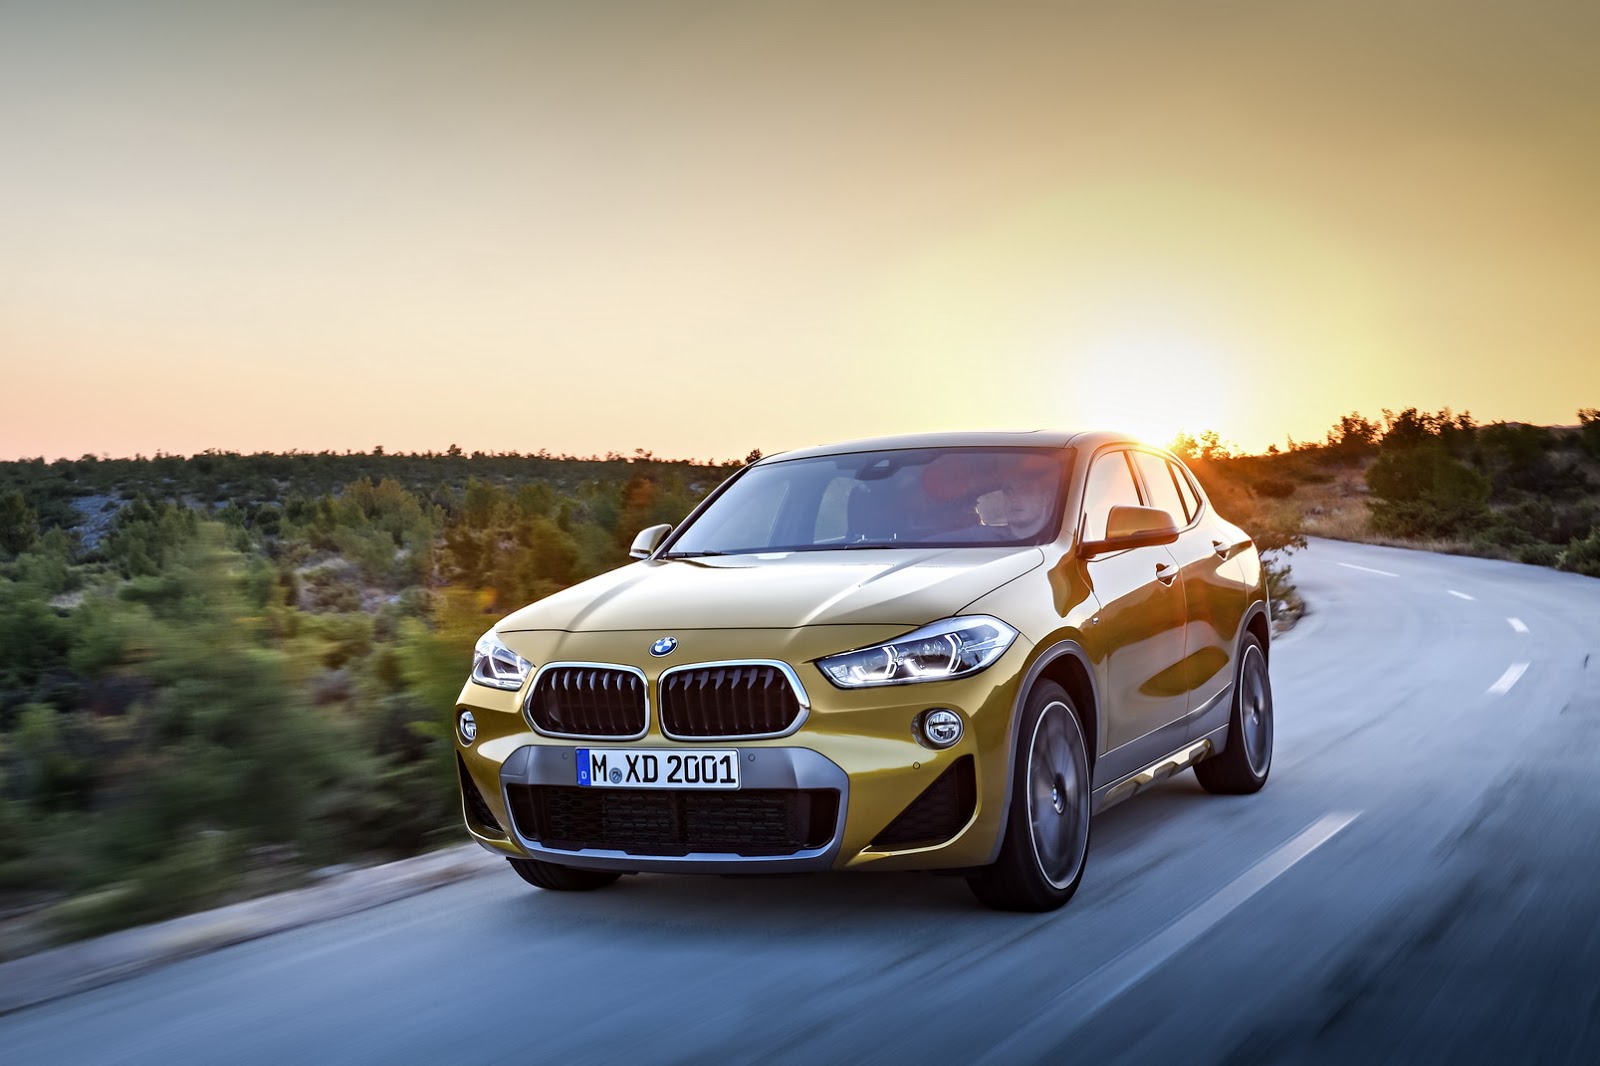 2018 BMW X2 (F39) Goes Official, Boasts Head-Turning Exterior Design